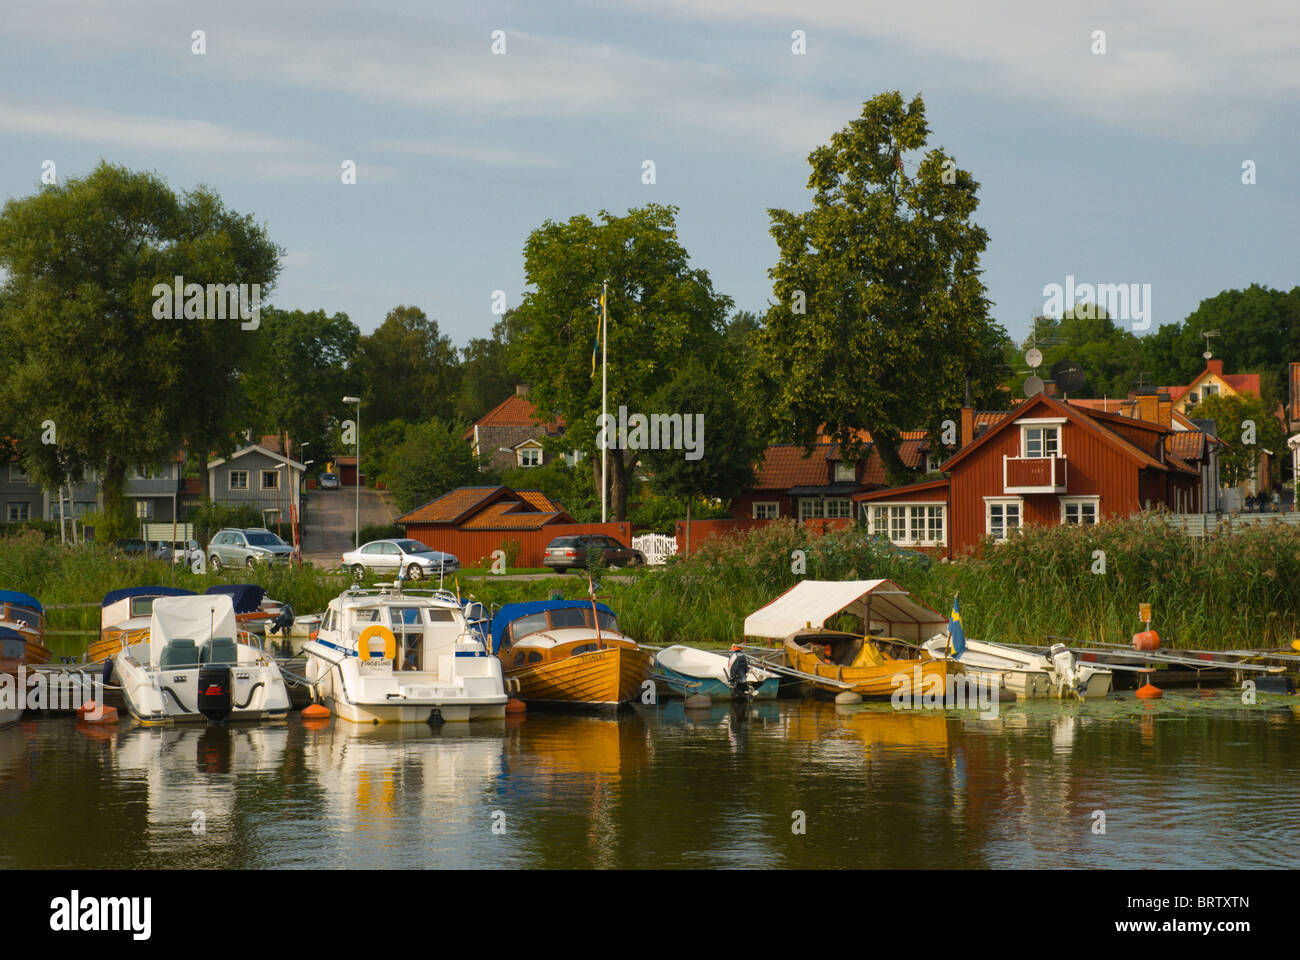 Boats in Sigtuna the oldest town in Sweden in Greater Stockholm area Stock Photo